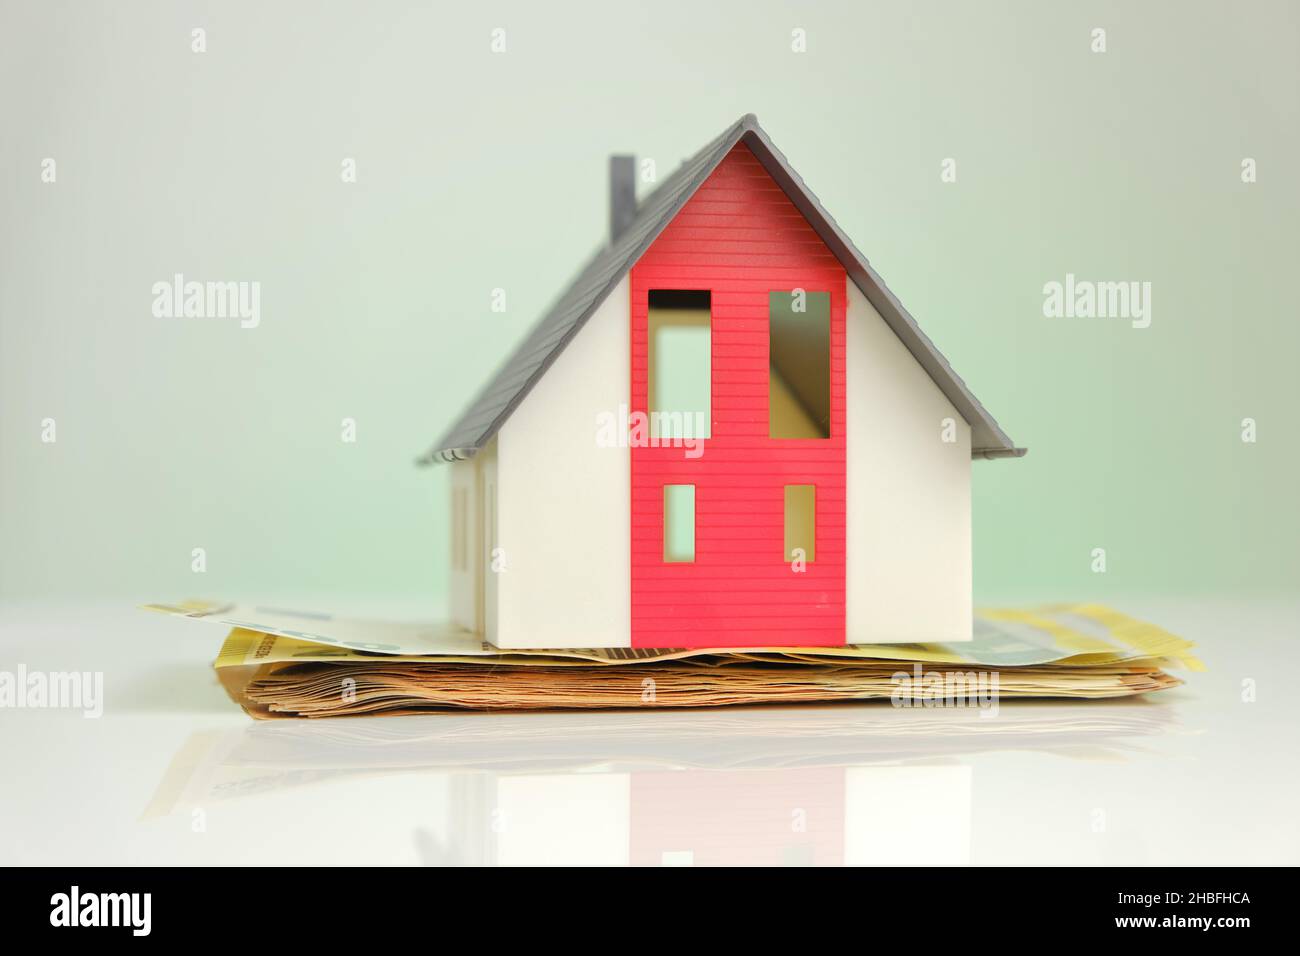 Buying and building a house.House and money. Mock house with roof on euro banknotes background. Stock Photo